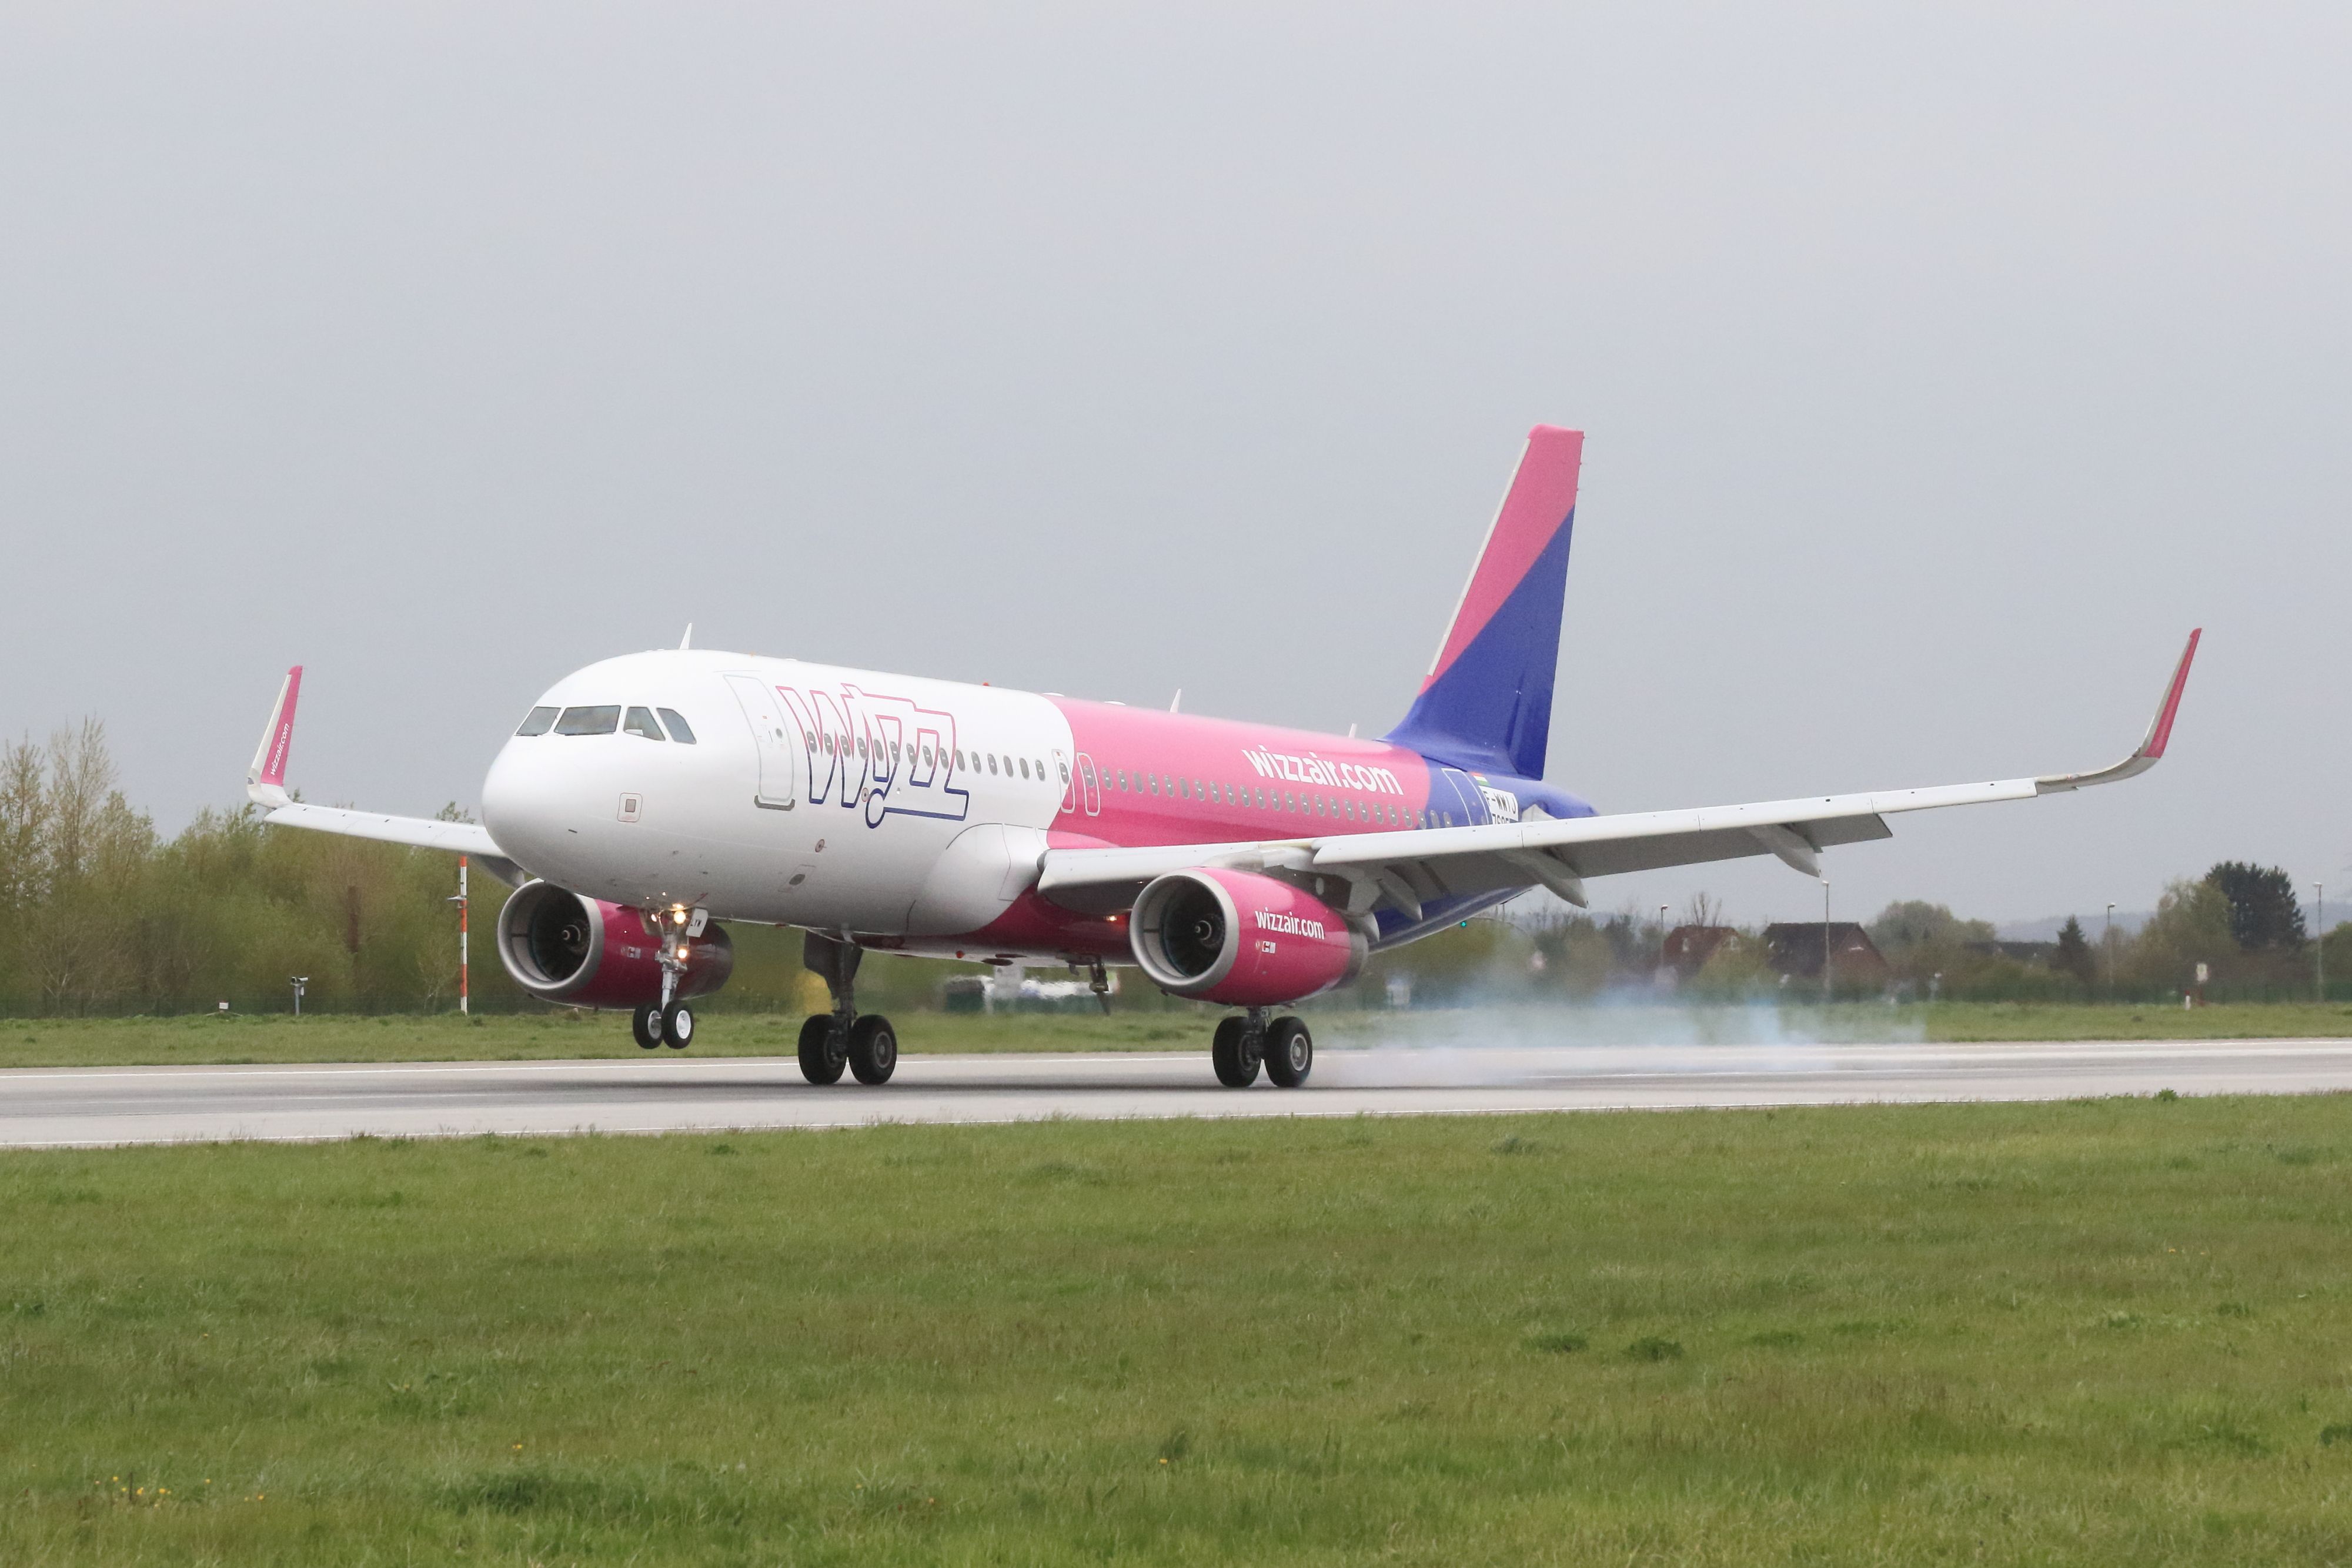 Wizz Air Airbus A320 Landing In Cloudy Conditions